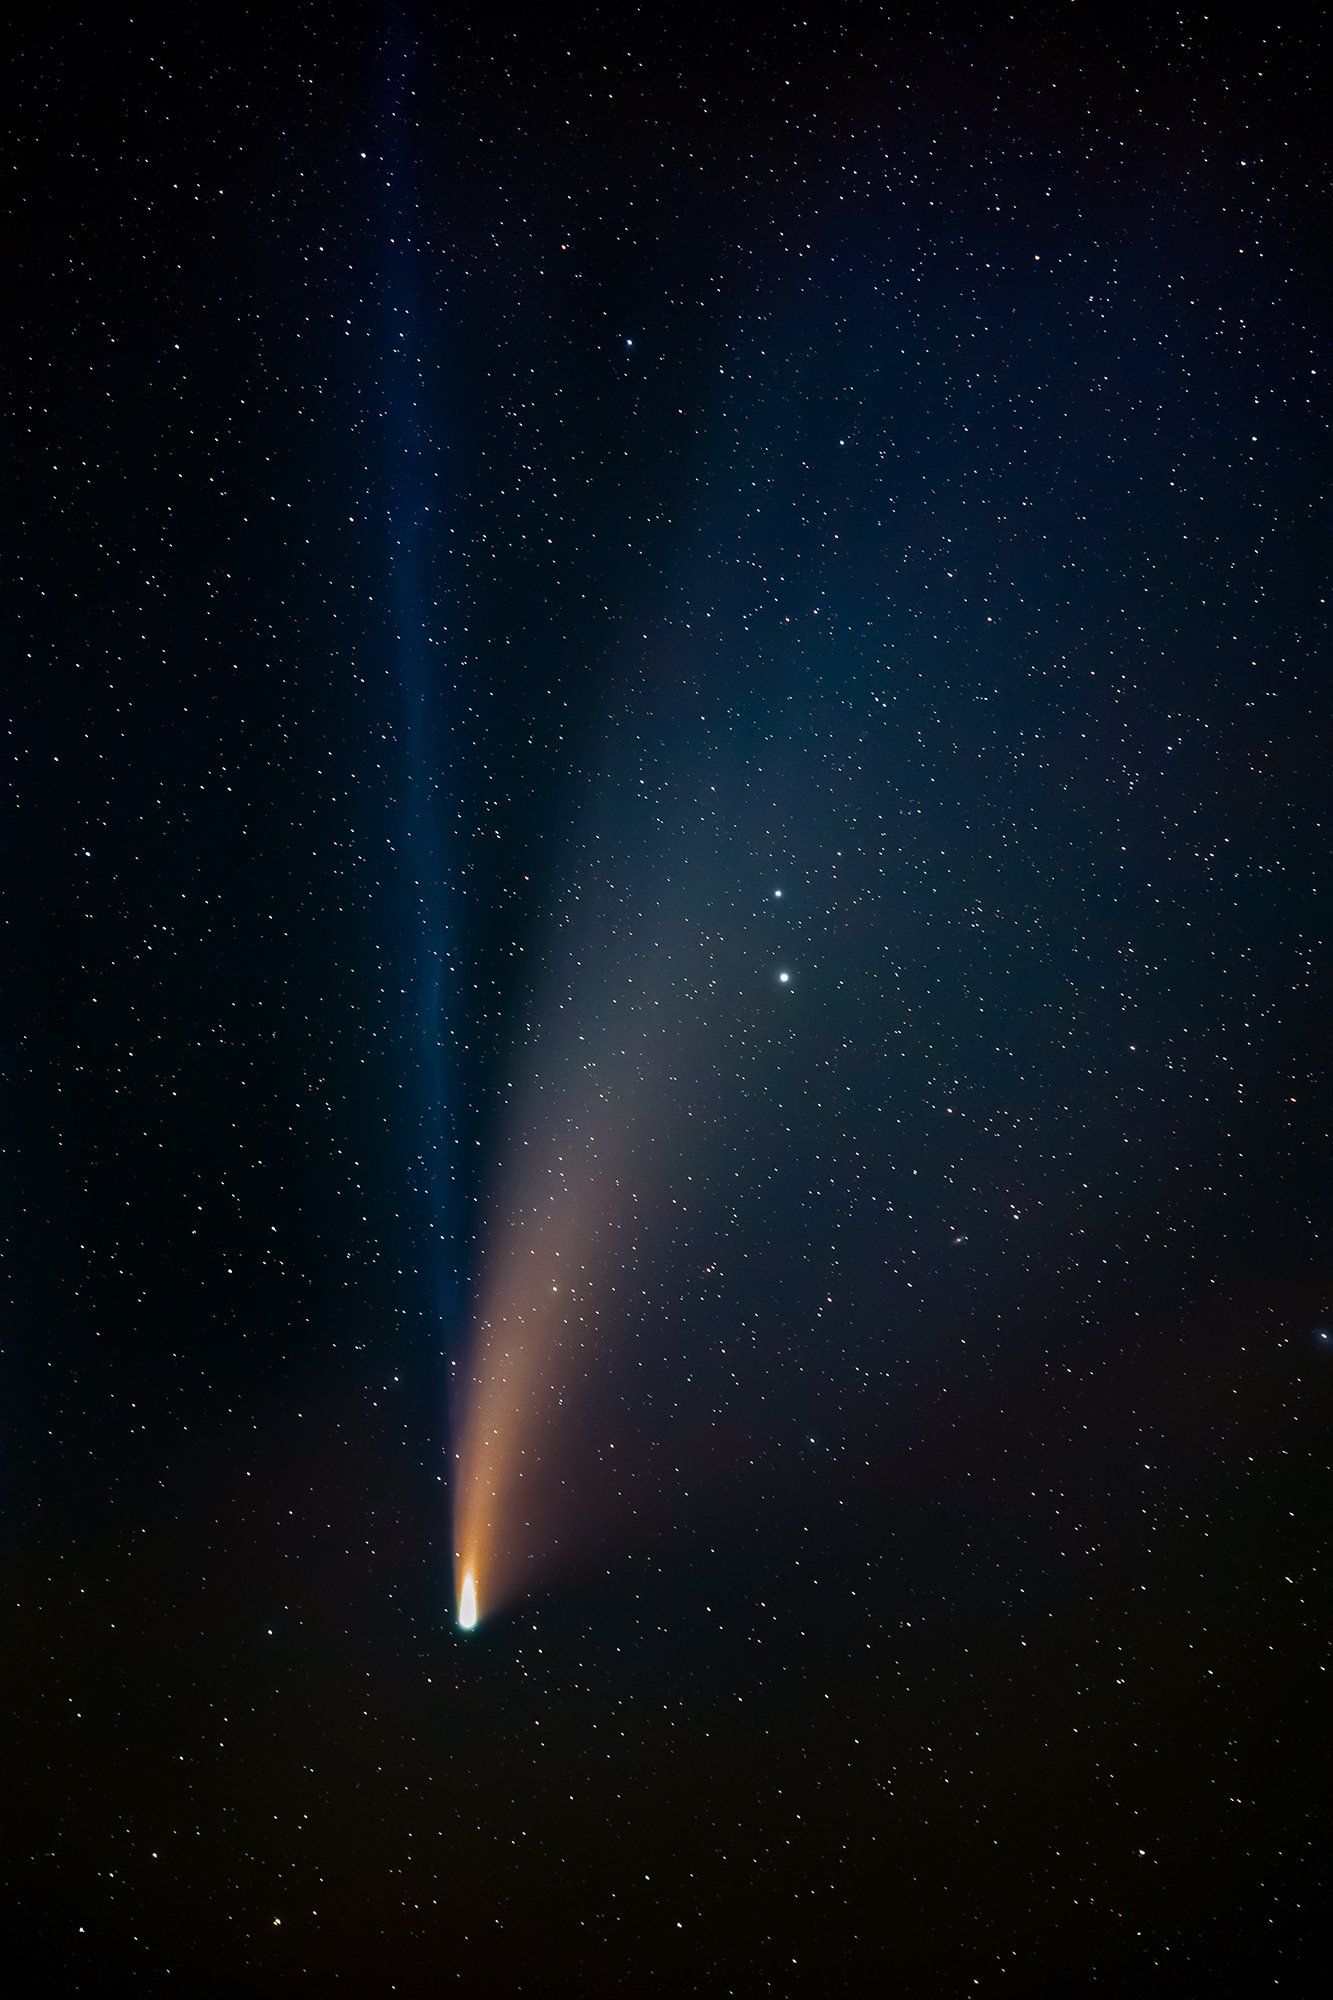 Comet NEOWISE lit up the skies in the summer of 2020.